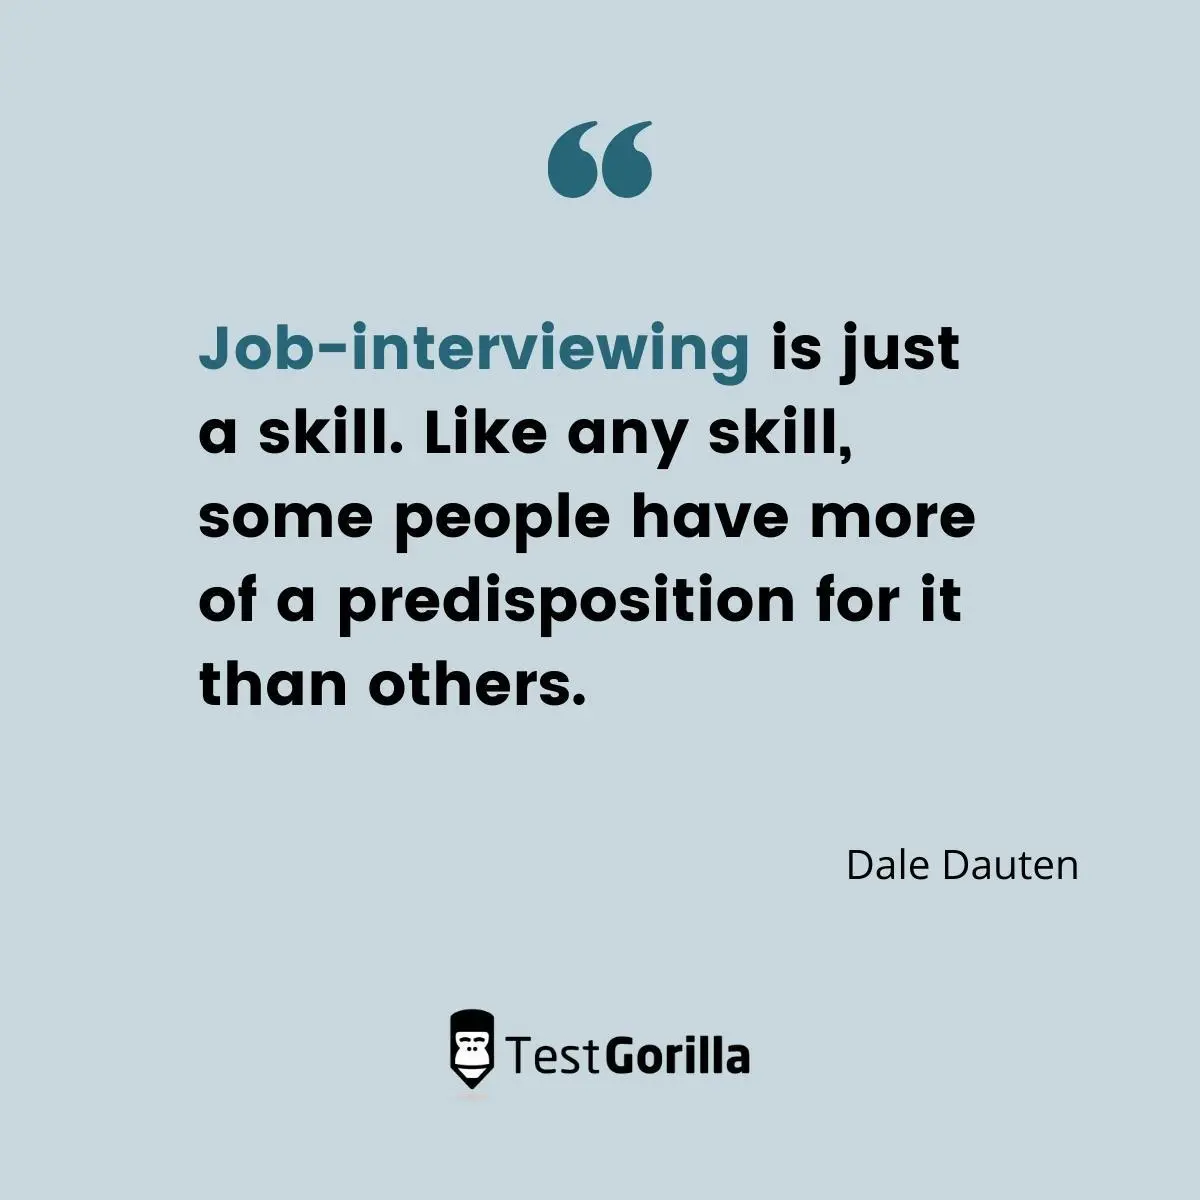 Job-interviewing is just a skill. Like any skill, some people have more of a predisposition for it than others. - Dale Dauten